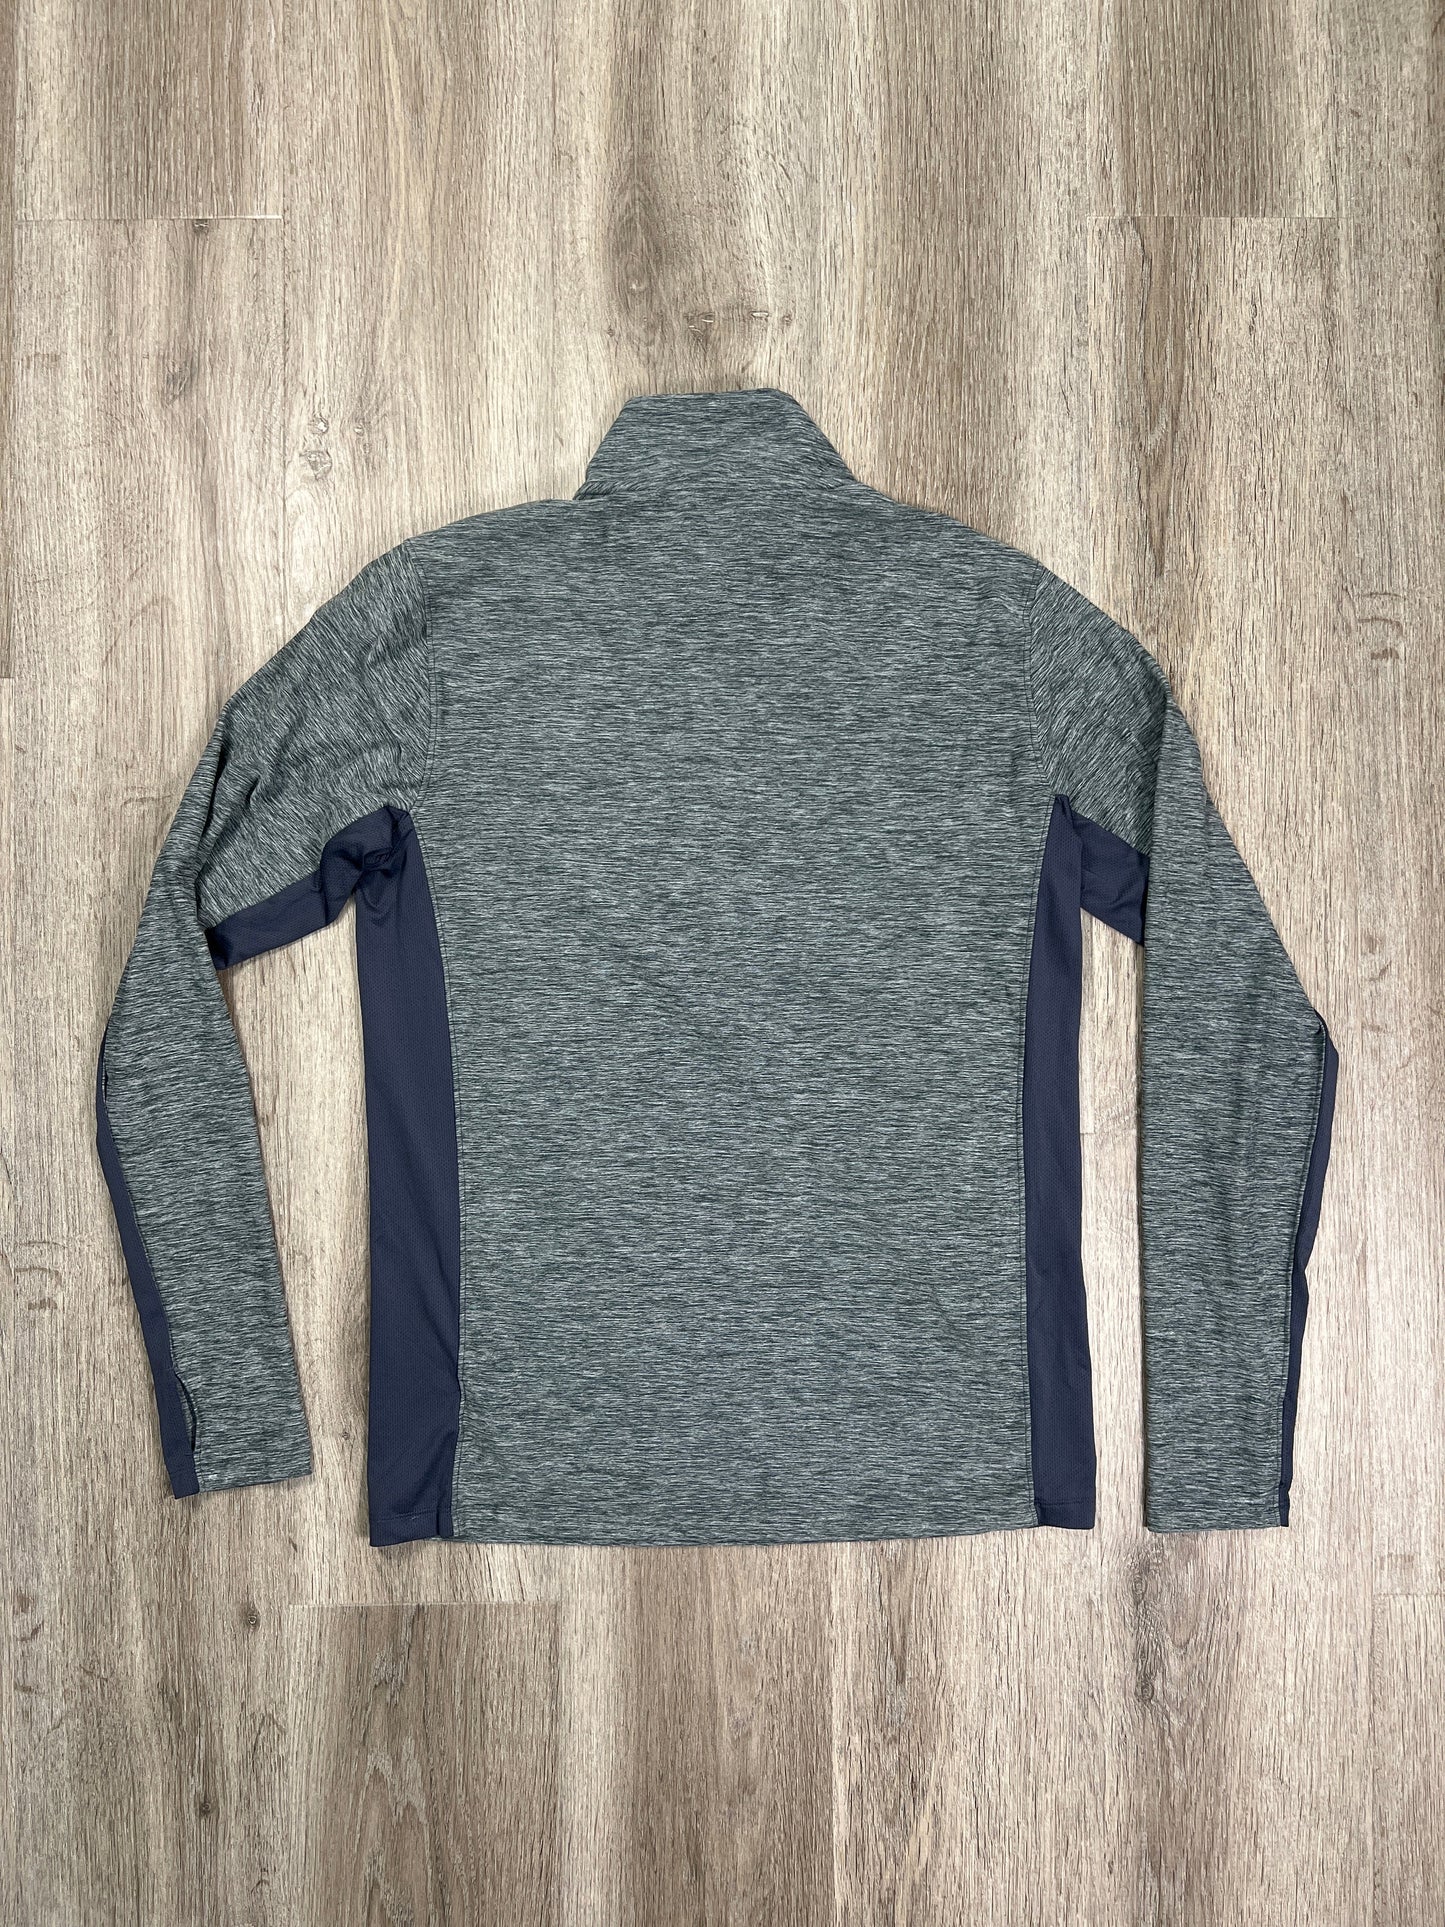 Athletic Top Long Sleeve Collar By New Balance  Size: M